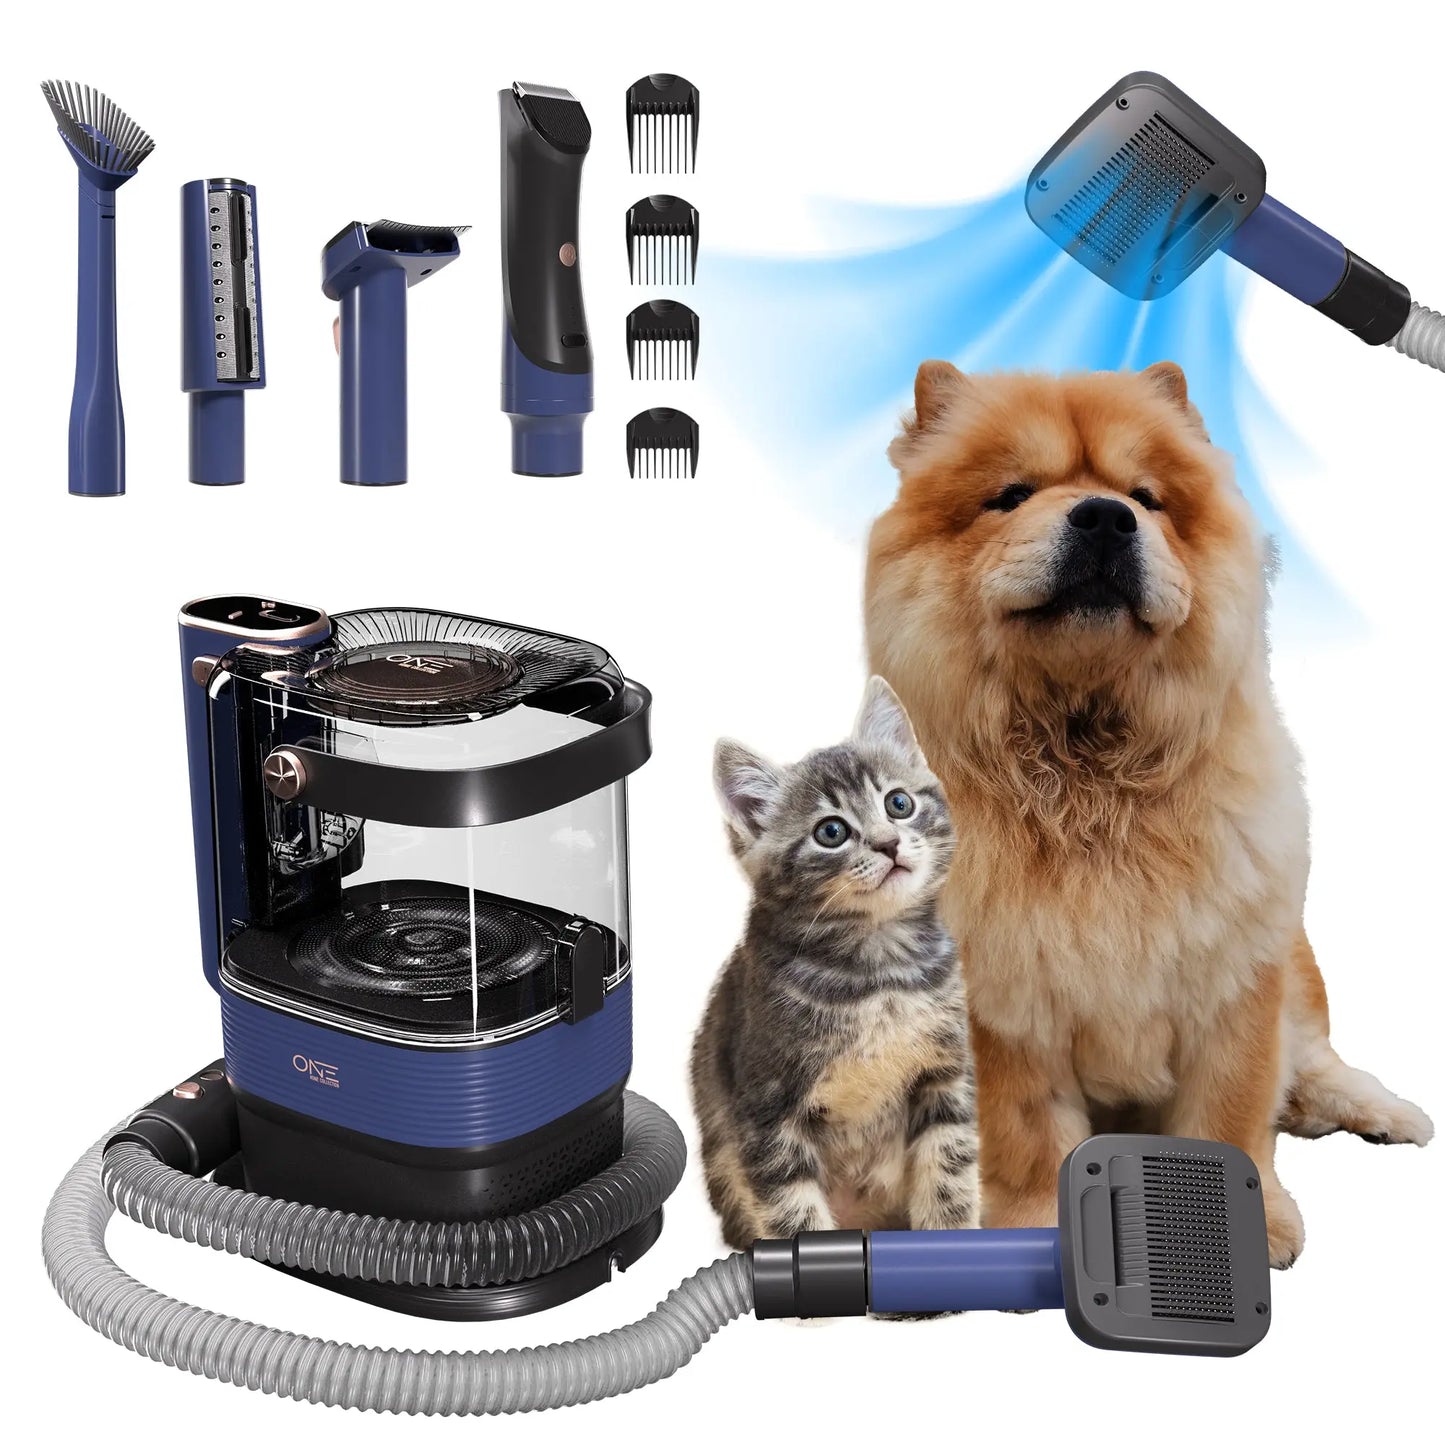 ONE Pet Vacuum with Grooming Kit, 3.2L Capacity, 6 Replaceable Heads with 4 Combs Suitable for All Hair Lengths, Low Noise Design